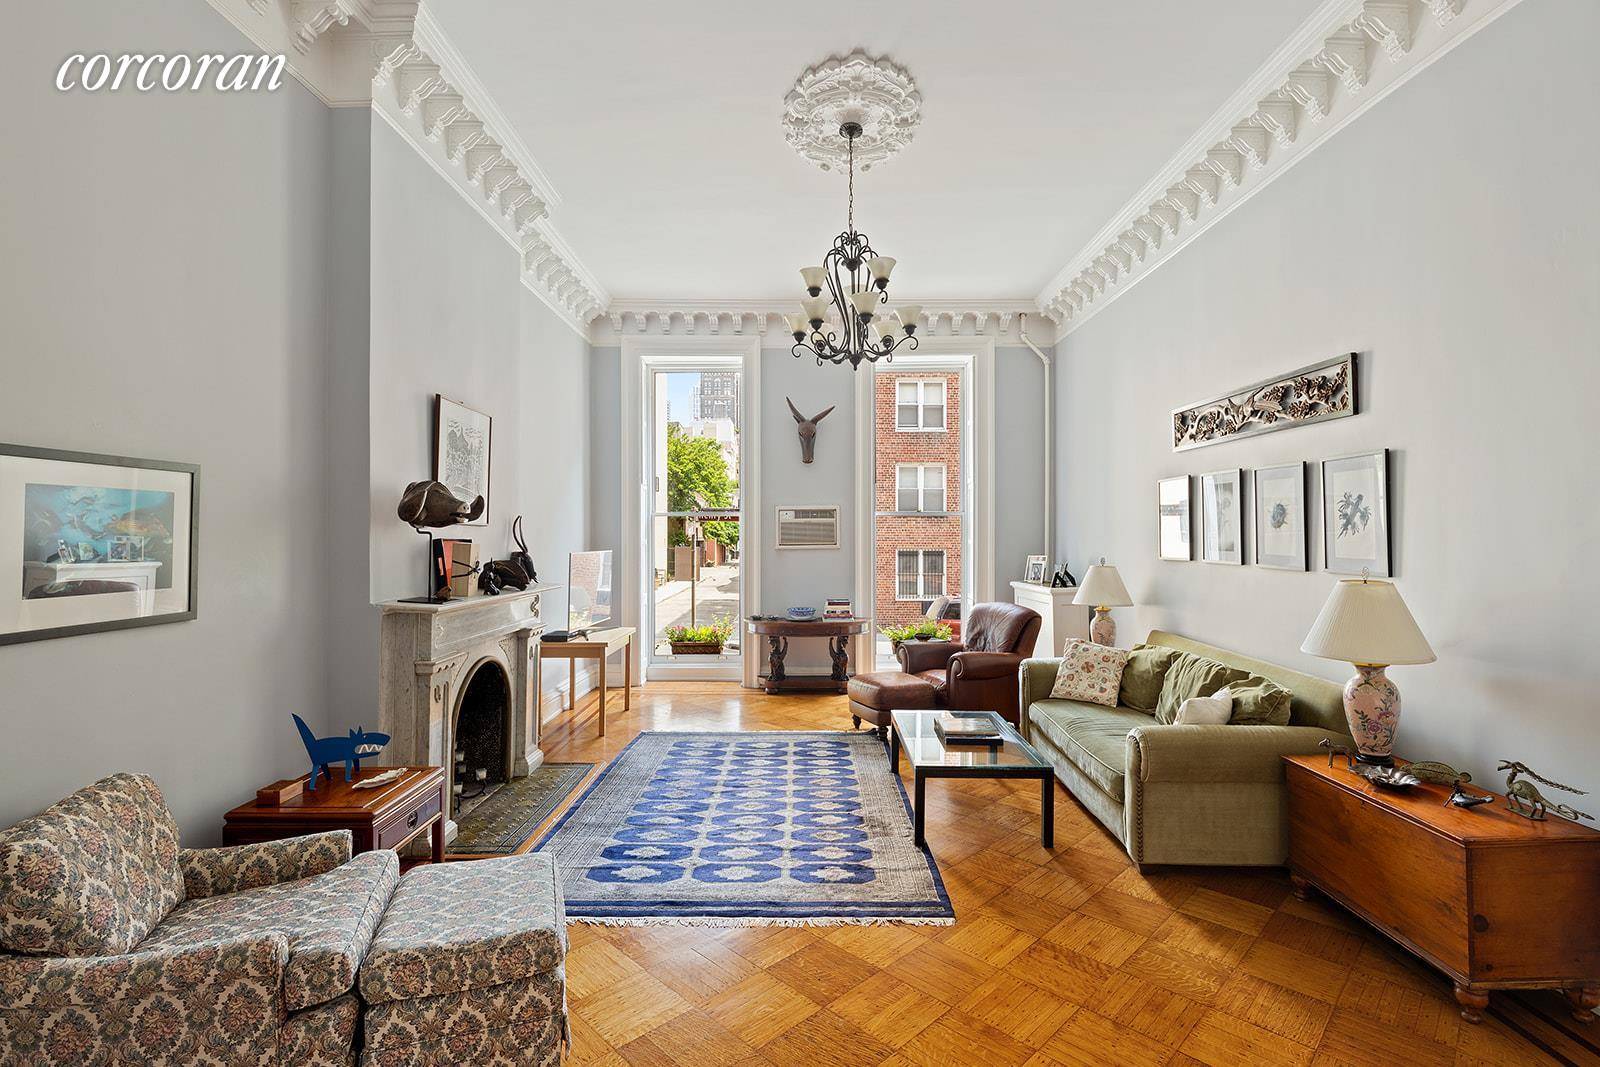 Enjoy your private garden and lovely light filled home in this stunning, spacious parlor floor garden floor duplex in an 1851 Brooklyn Heights 3 unit townhouse.